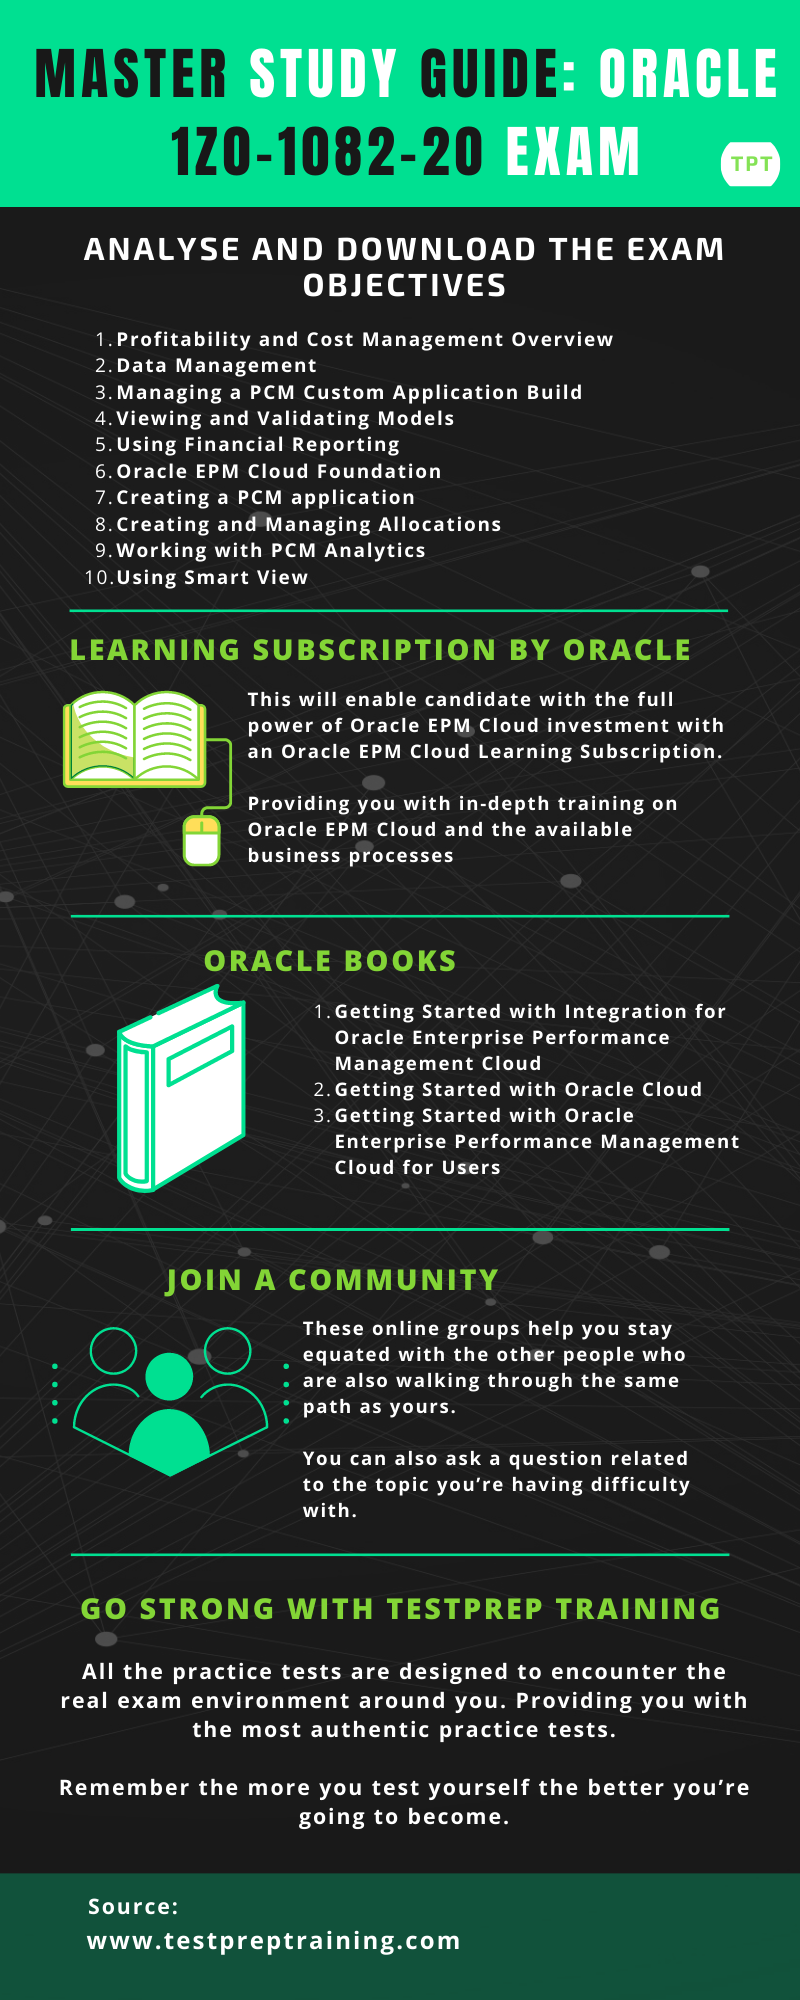 Preparation Guide | Oracle 1Z0-1082-20 Exam